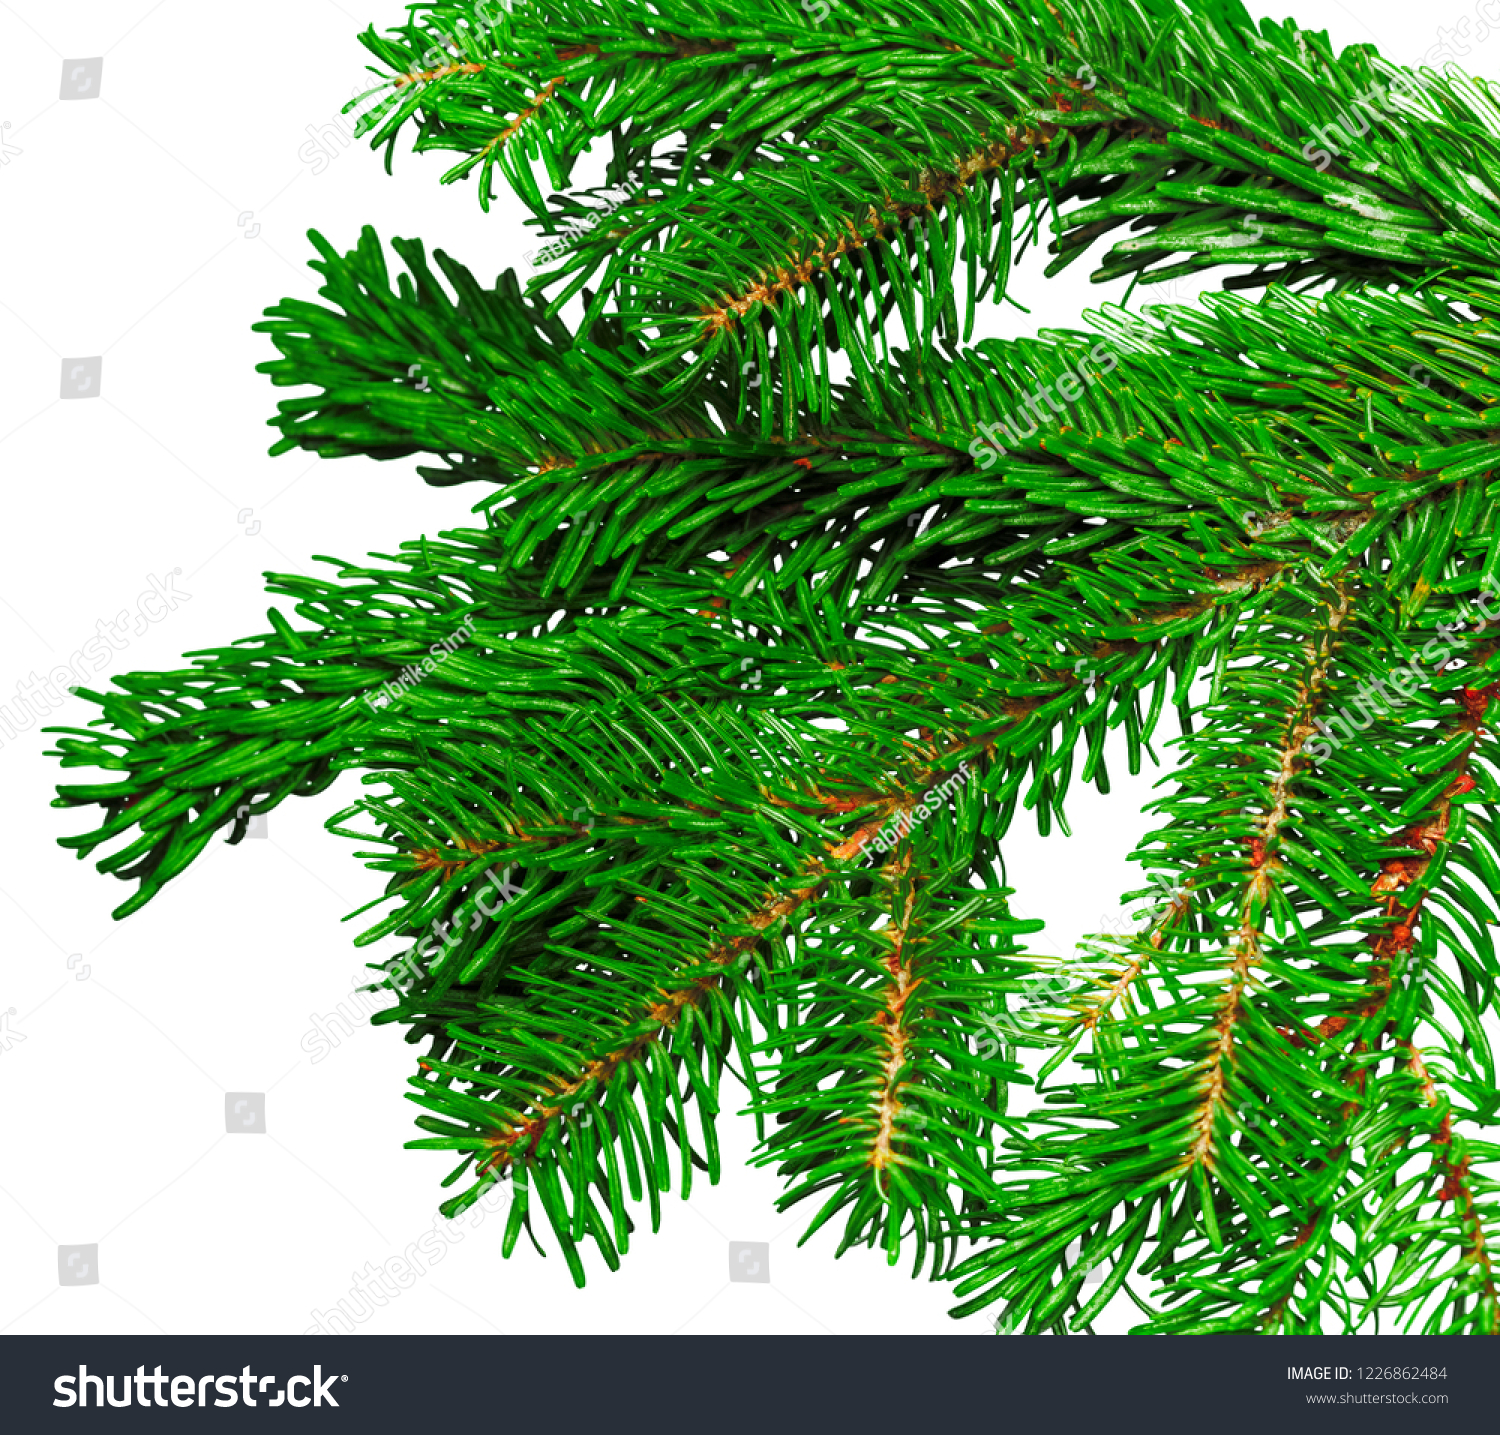 Fir branch isolated on white background #1226862484